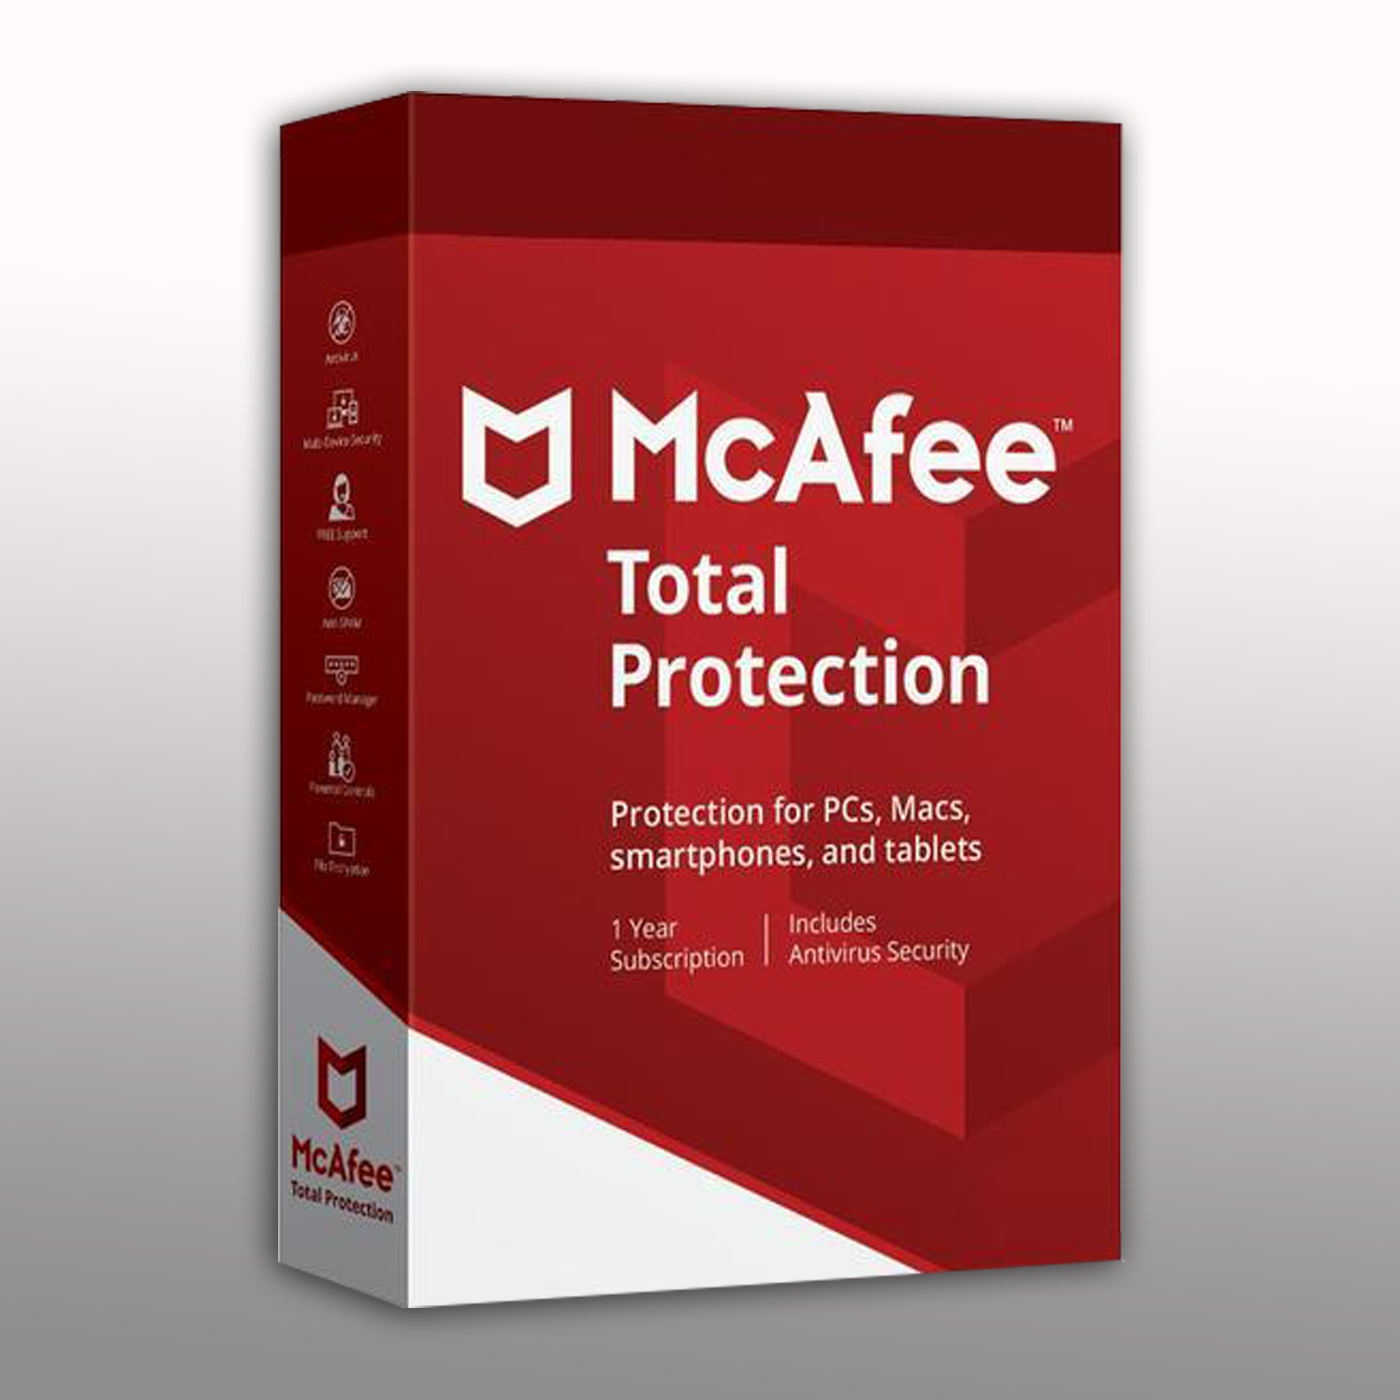 McAfee Total Protection key